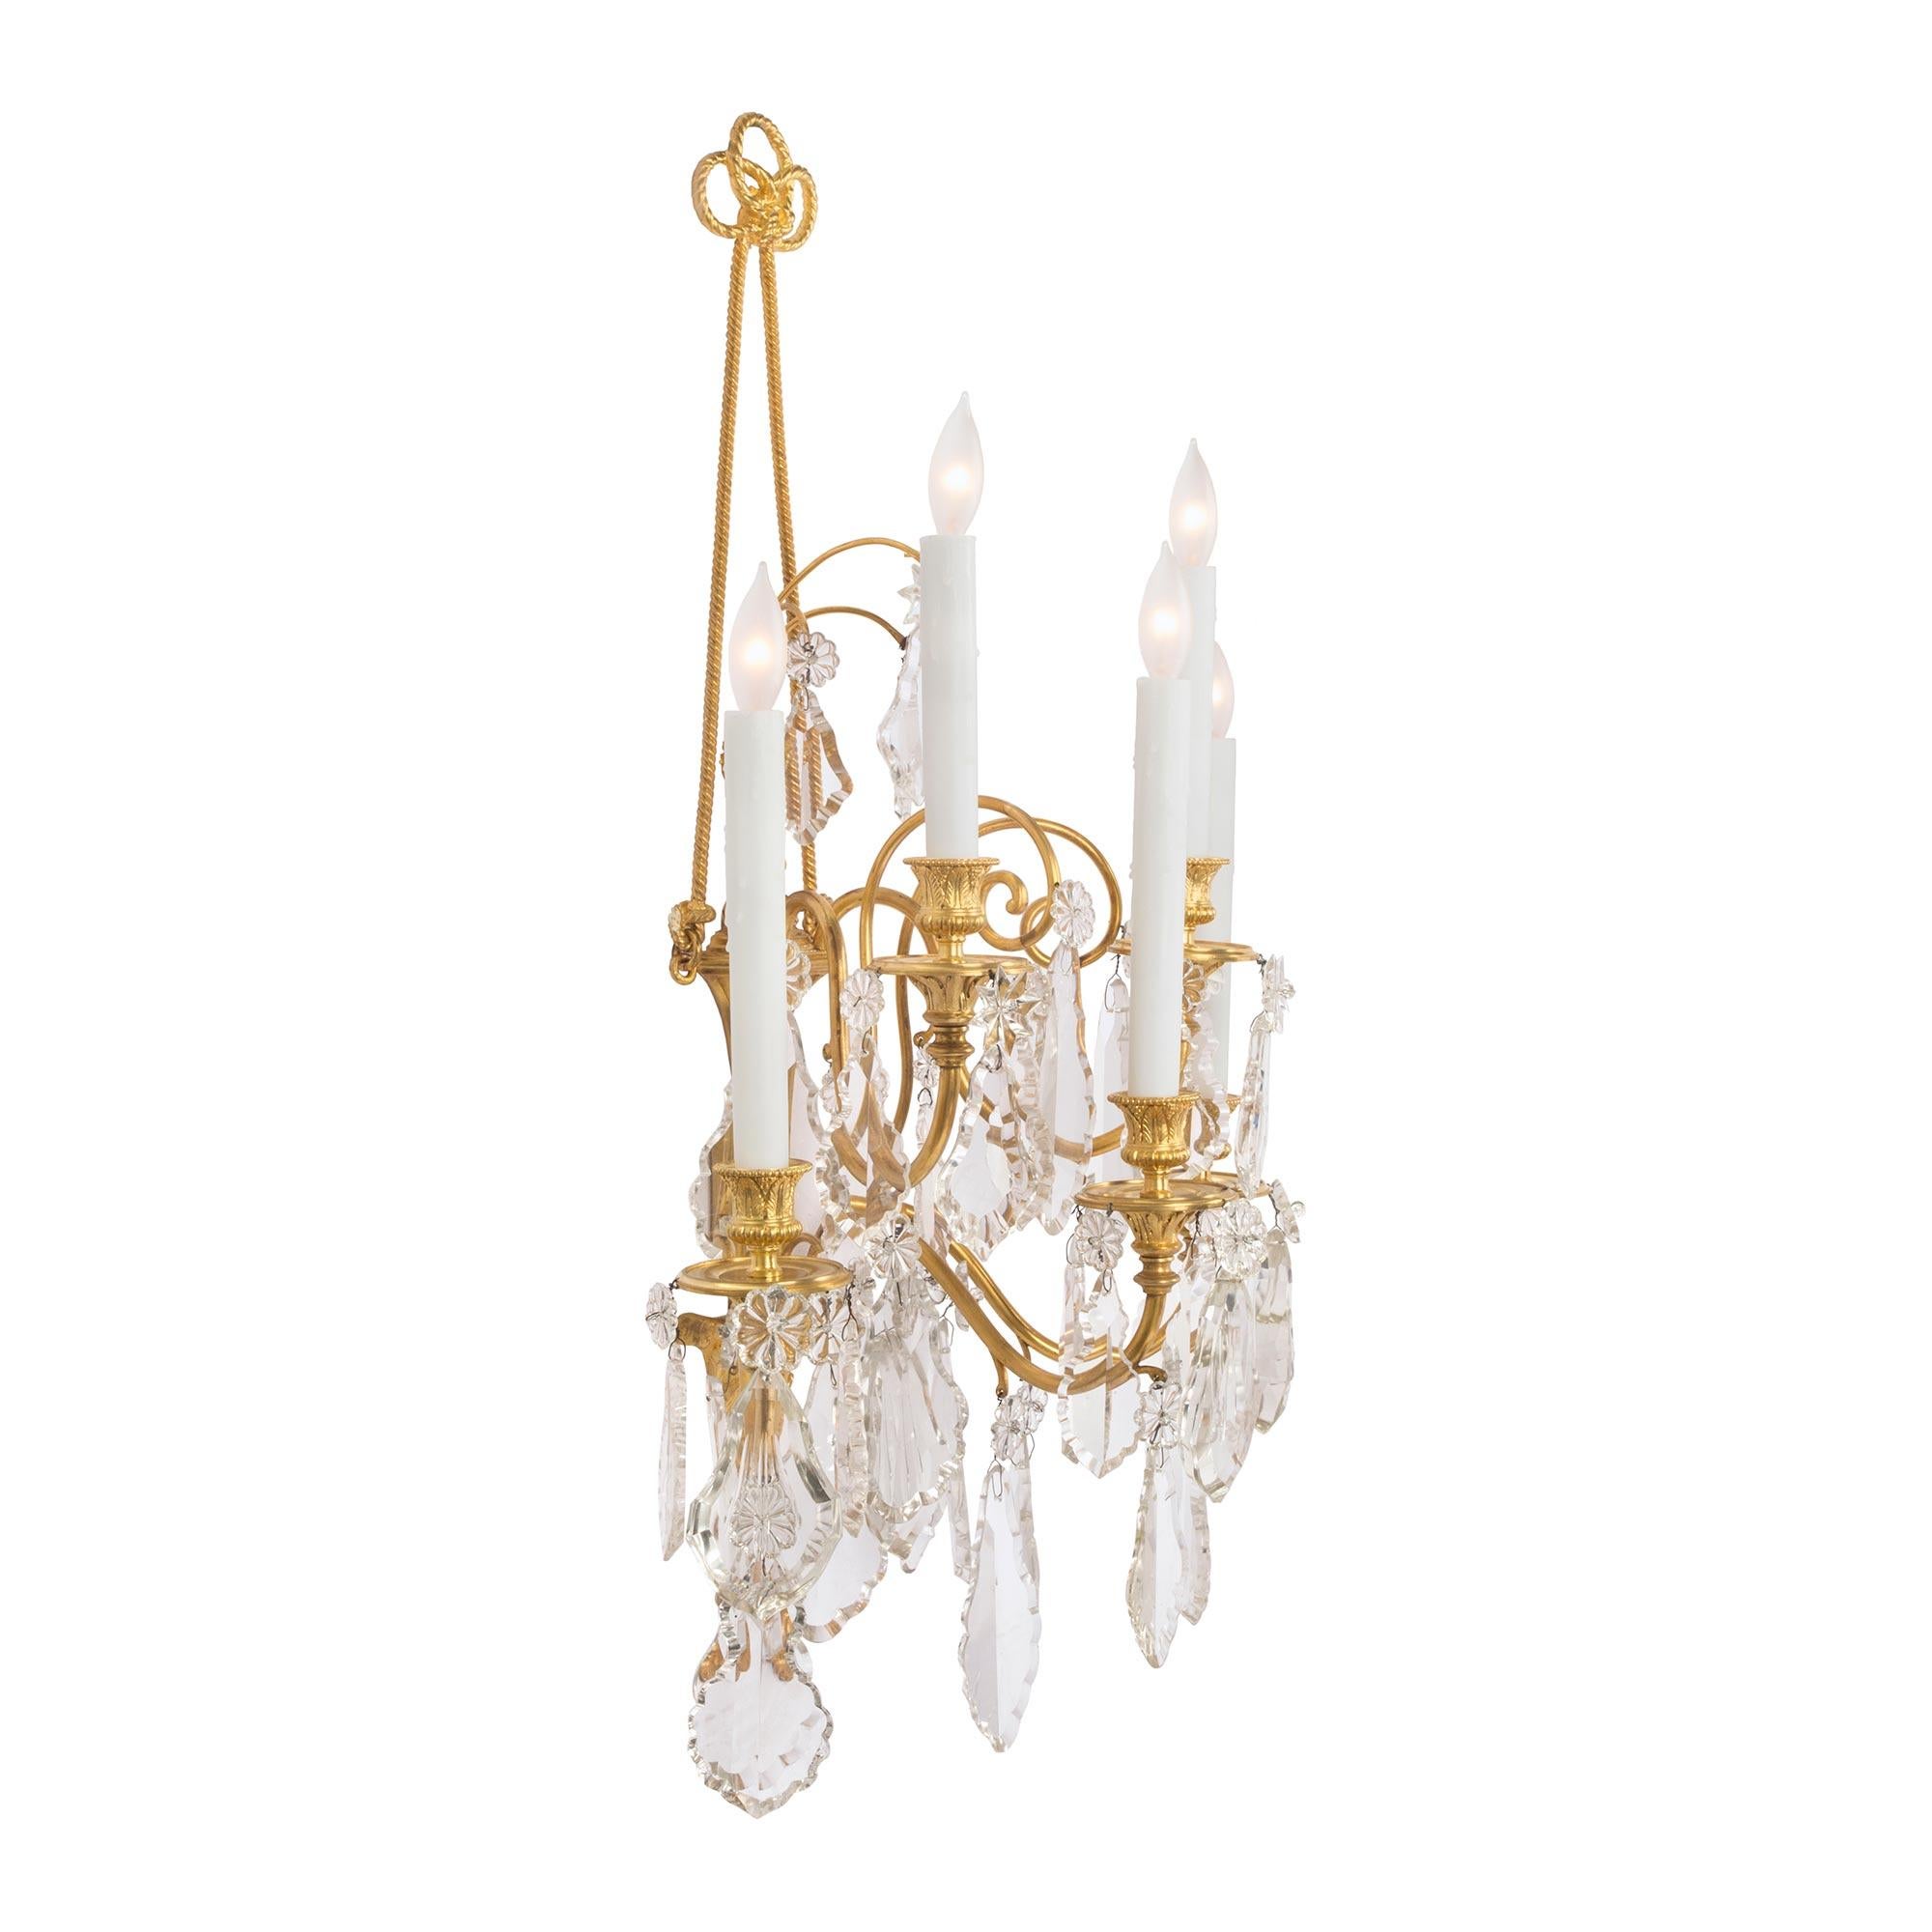 A stunning and large scale pair of French 19th century Louis XVI st. ormolu and Baccarat crystal five arm sconces. Each sconce is centered by beautiful and richly chased berried and foliate movements with finely etched designs below a large acanthus